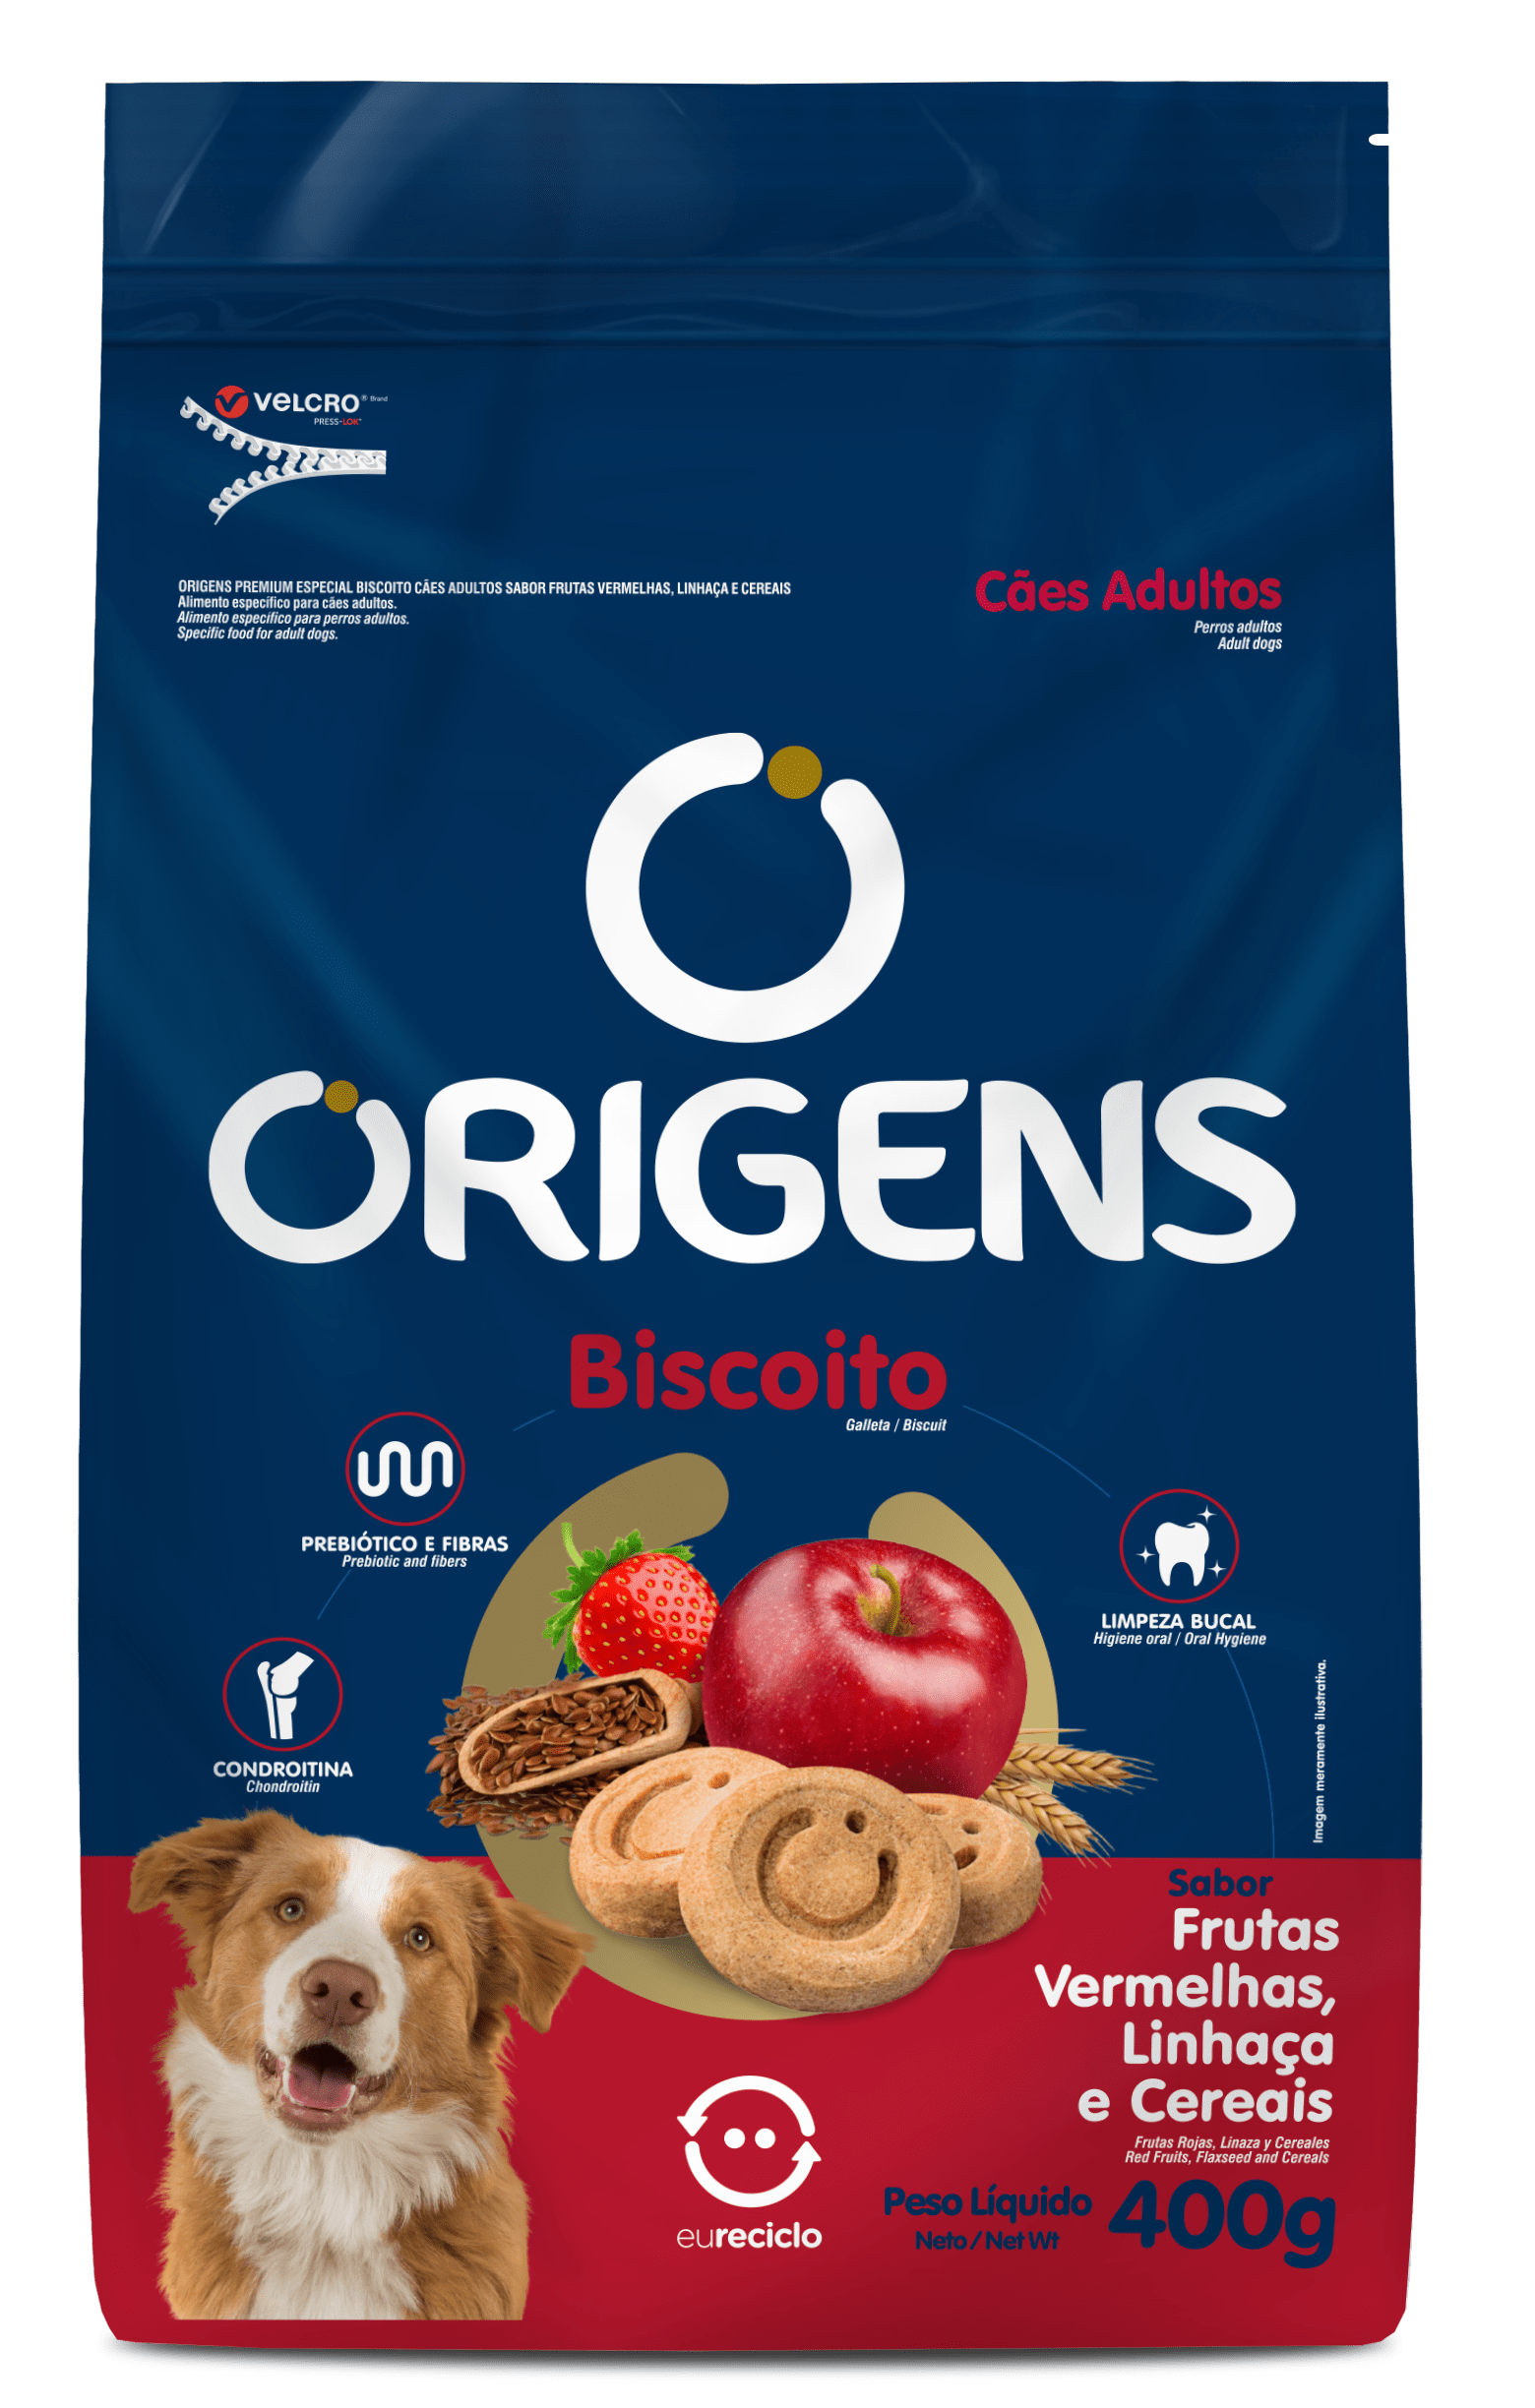 Origens Premium Especial Biscuit Adult Dogs Red fruits, flaxseed and Cereals flavor